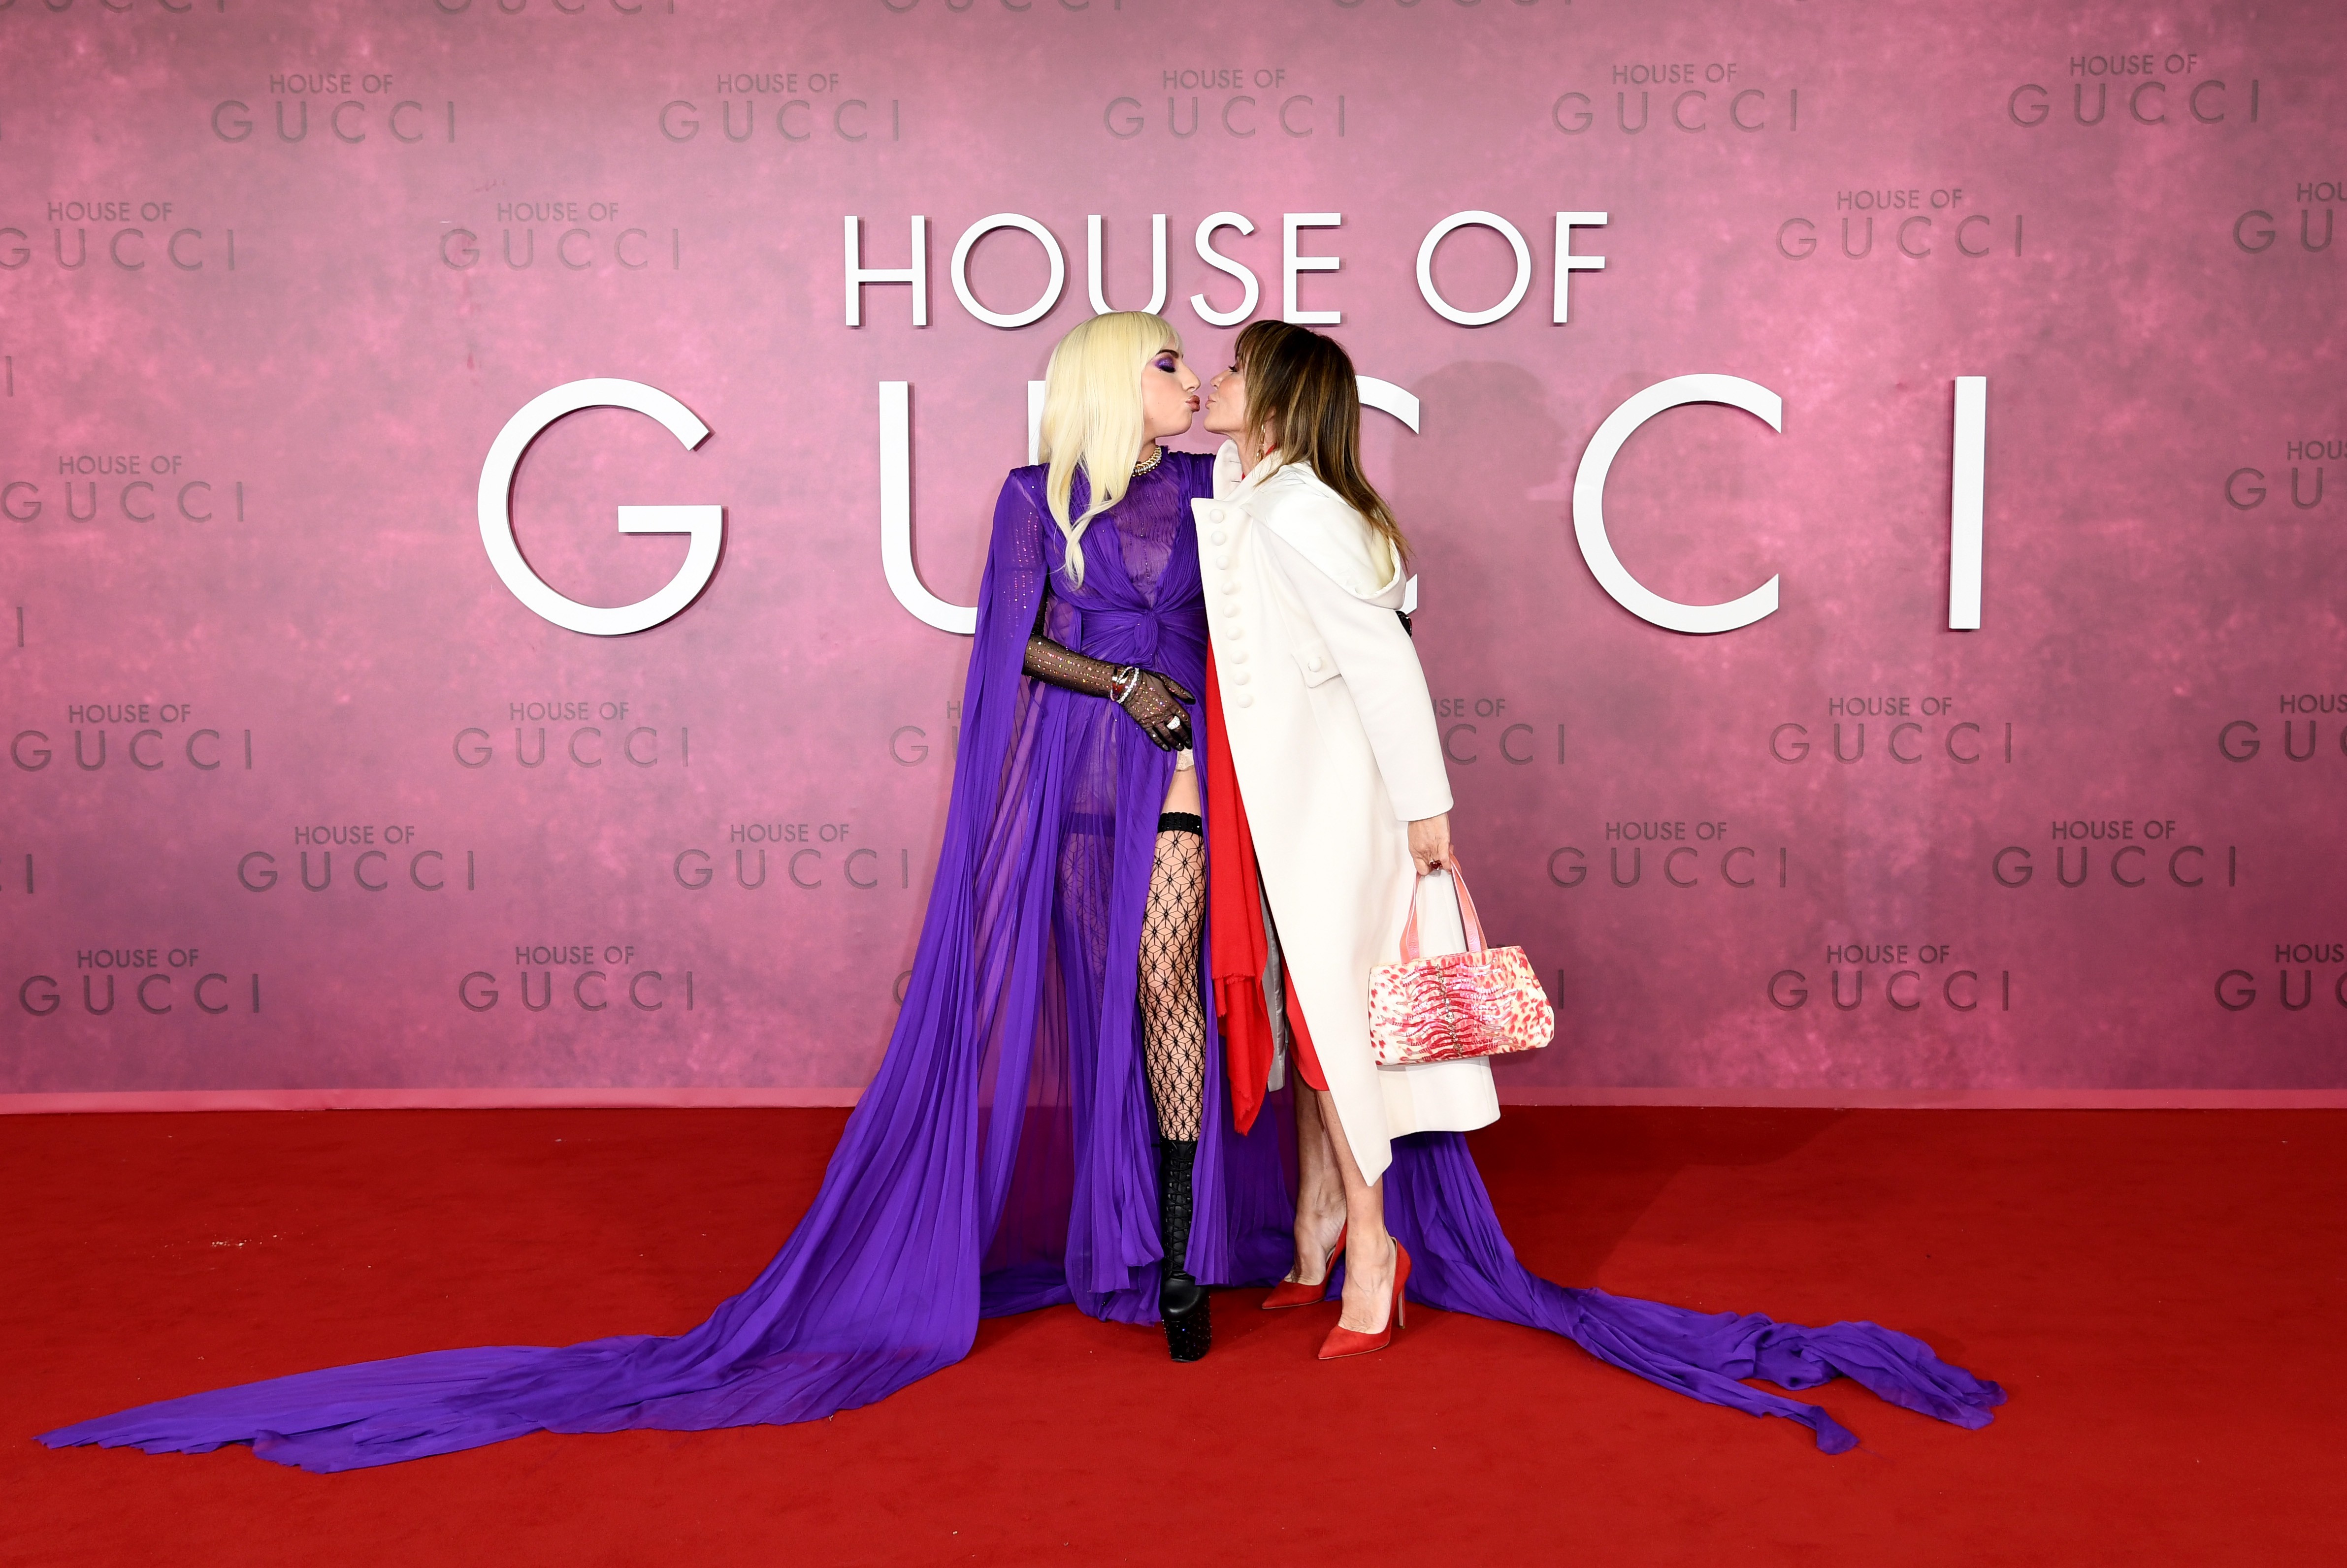 London, England - November 9: Lady Gaga and Giannina Fasio attended the UK premiere of the movie. "Gucci House" At Odeon Luxe Leicester Square on November 09, 2021 in London, England.  (Photo by Gareth Cattermole/Getty Images for Metro-Goldwyn-Mayer Studios and Un (Foto: Gareth Cattermole/Getty Images f)